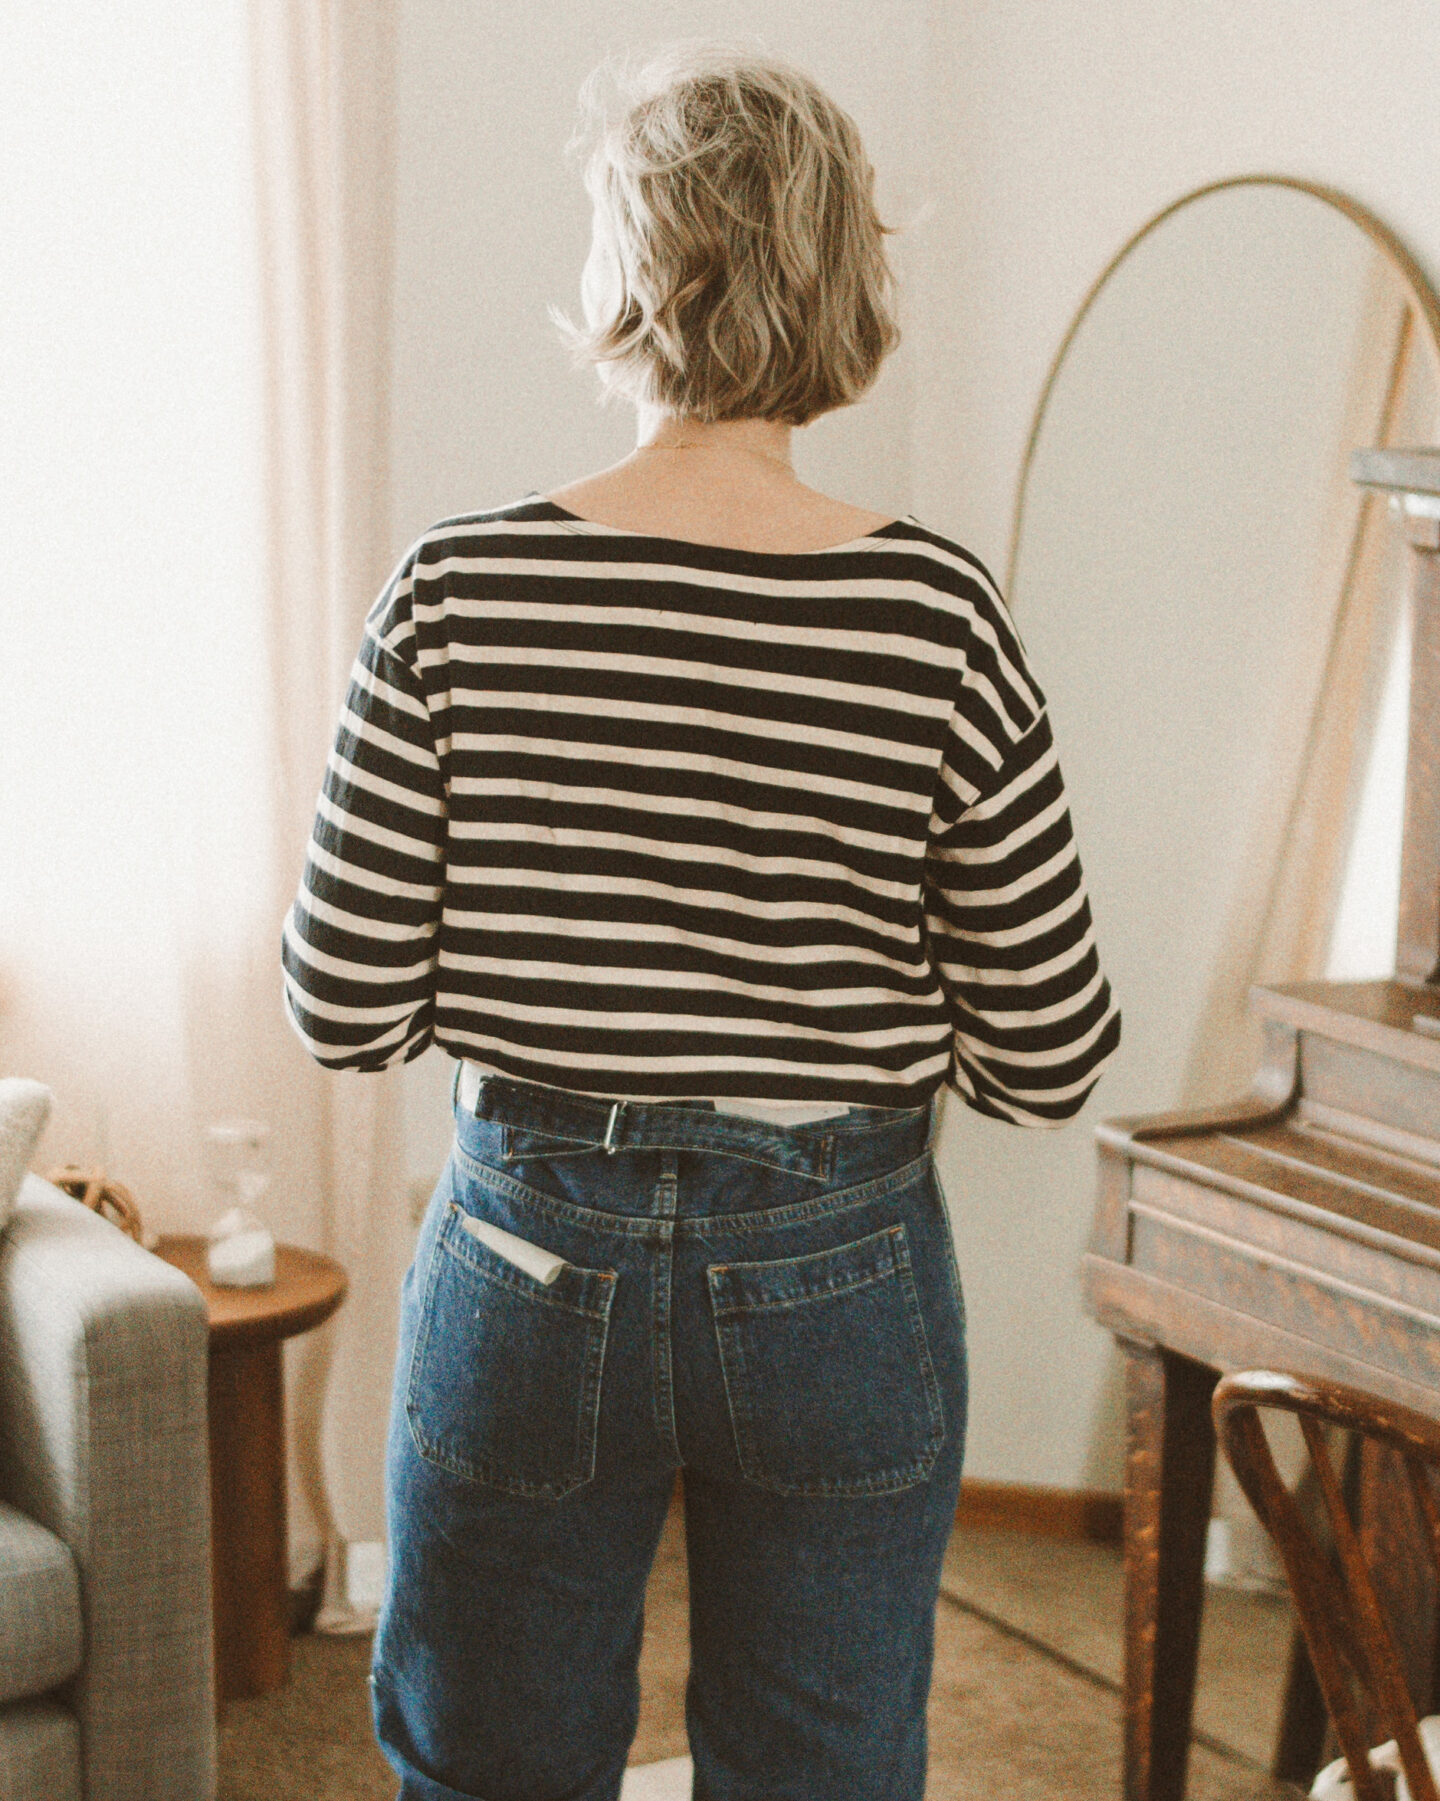 Karin Emily wears and reviews Everlane cinched waist jeans